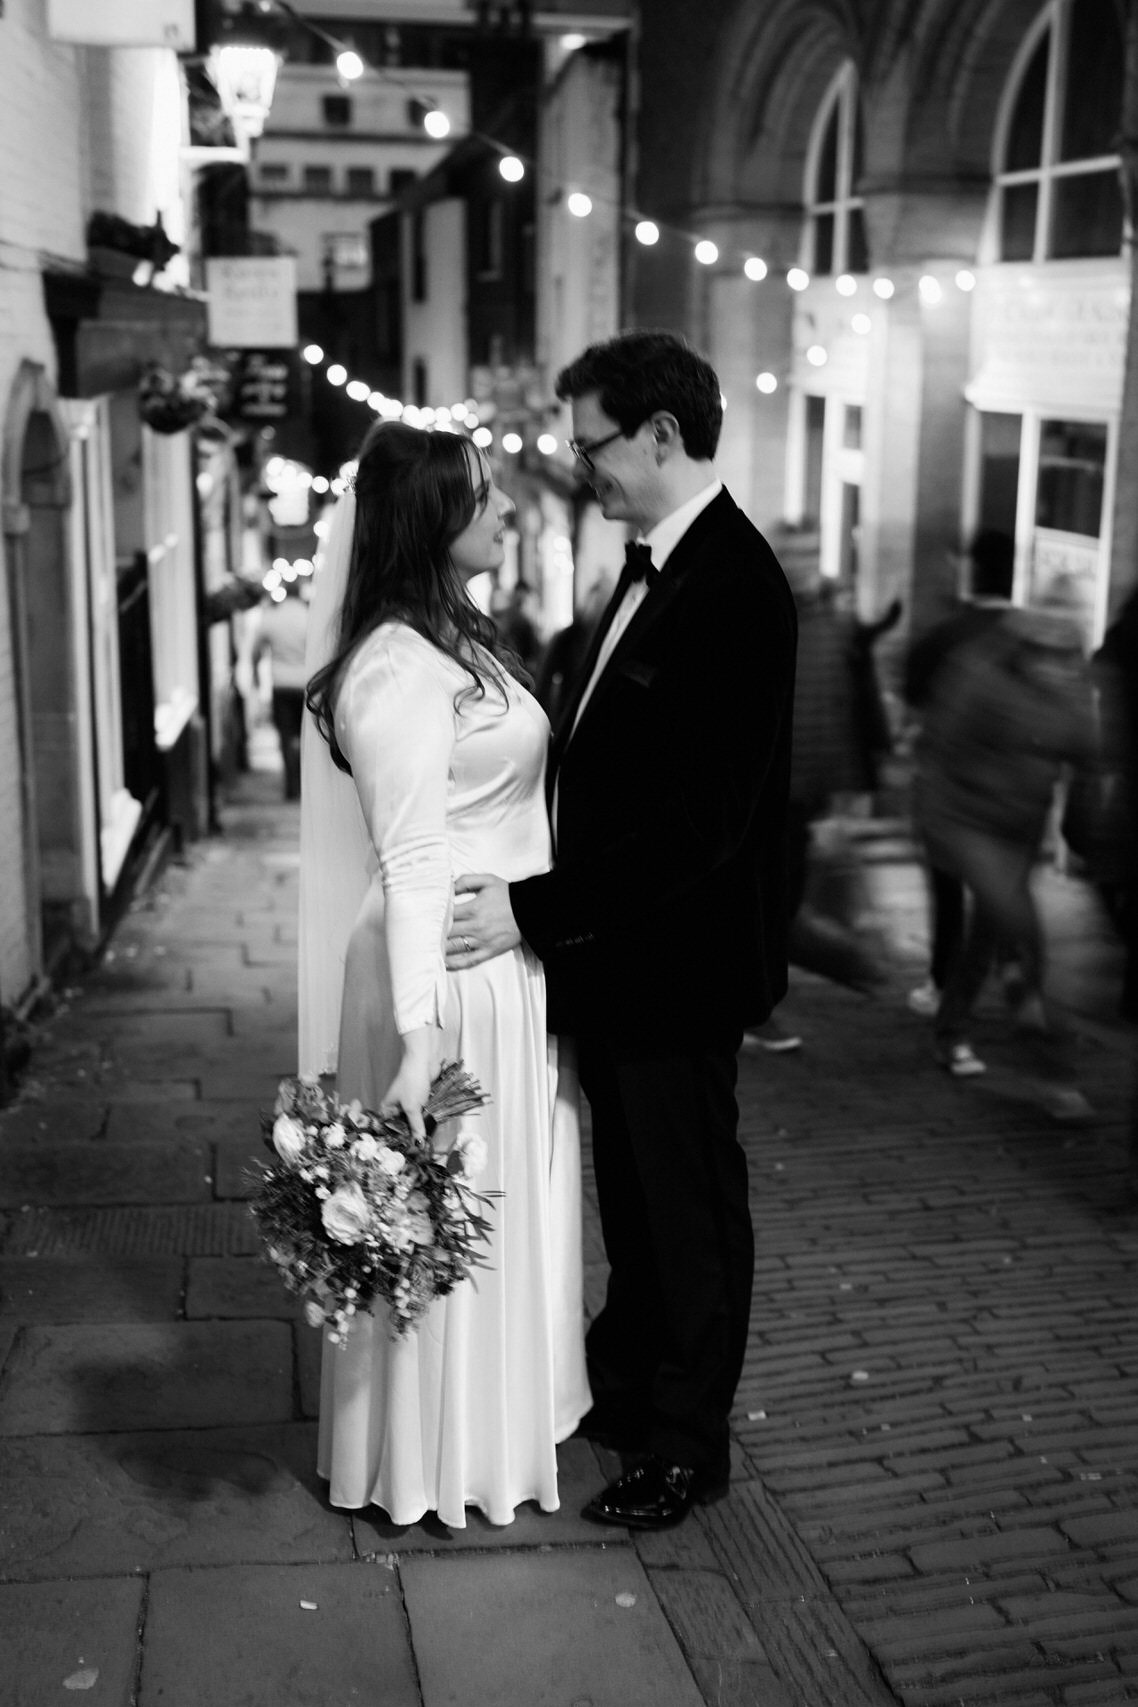 A couple just married standing on a stone-paved street at night.